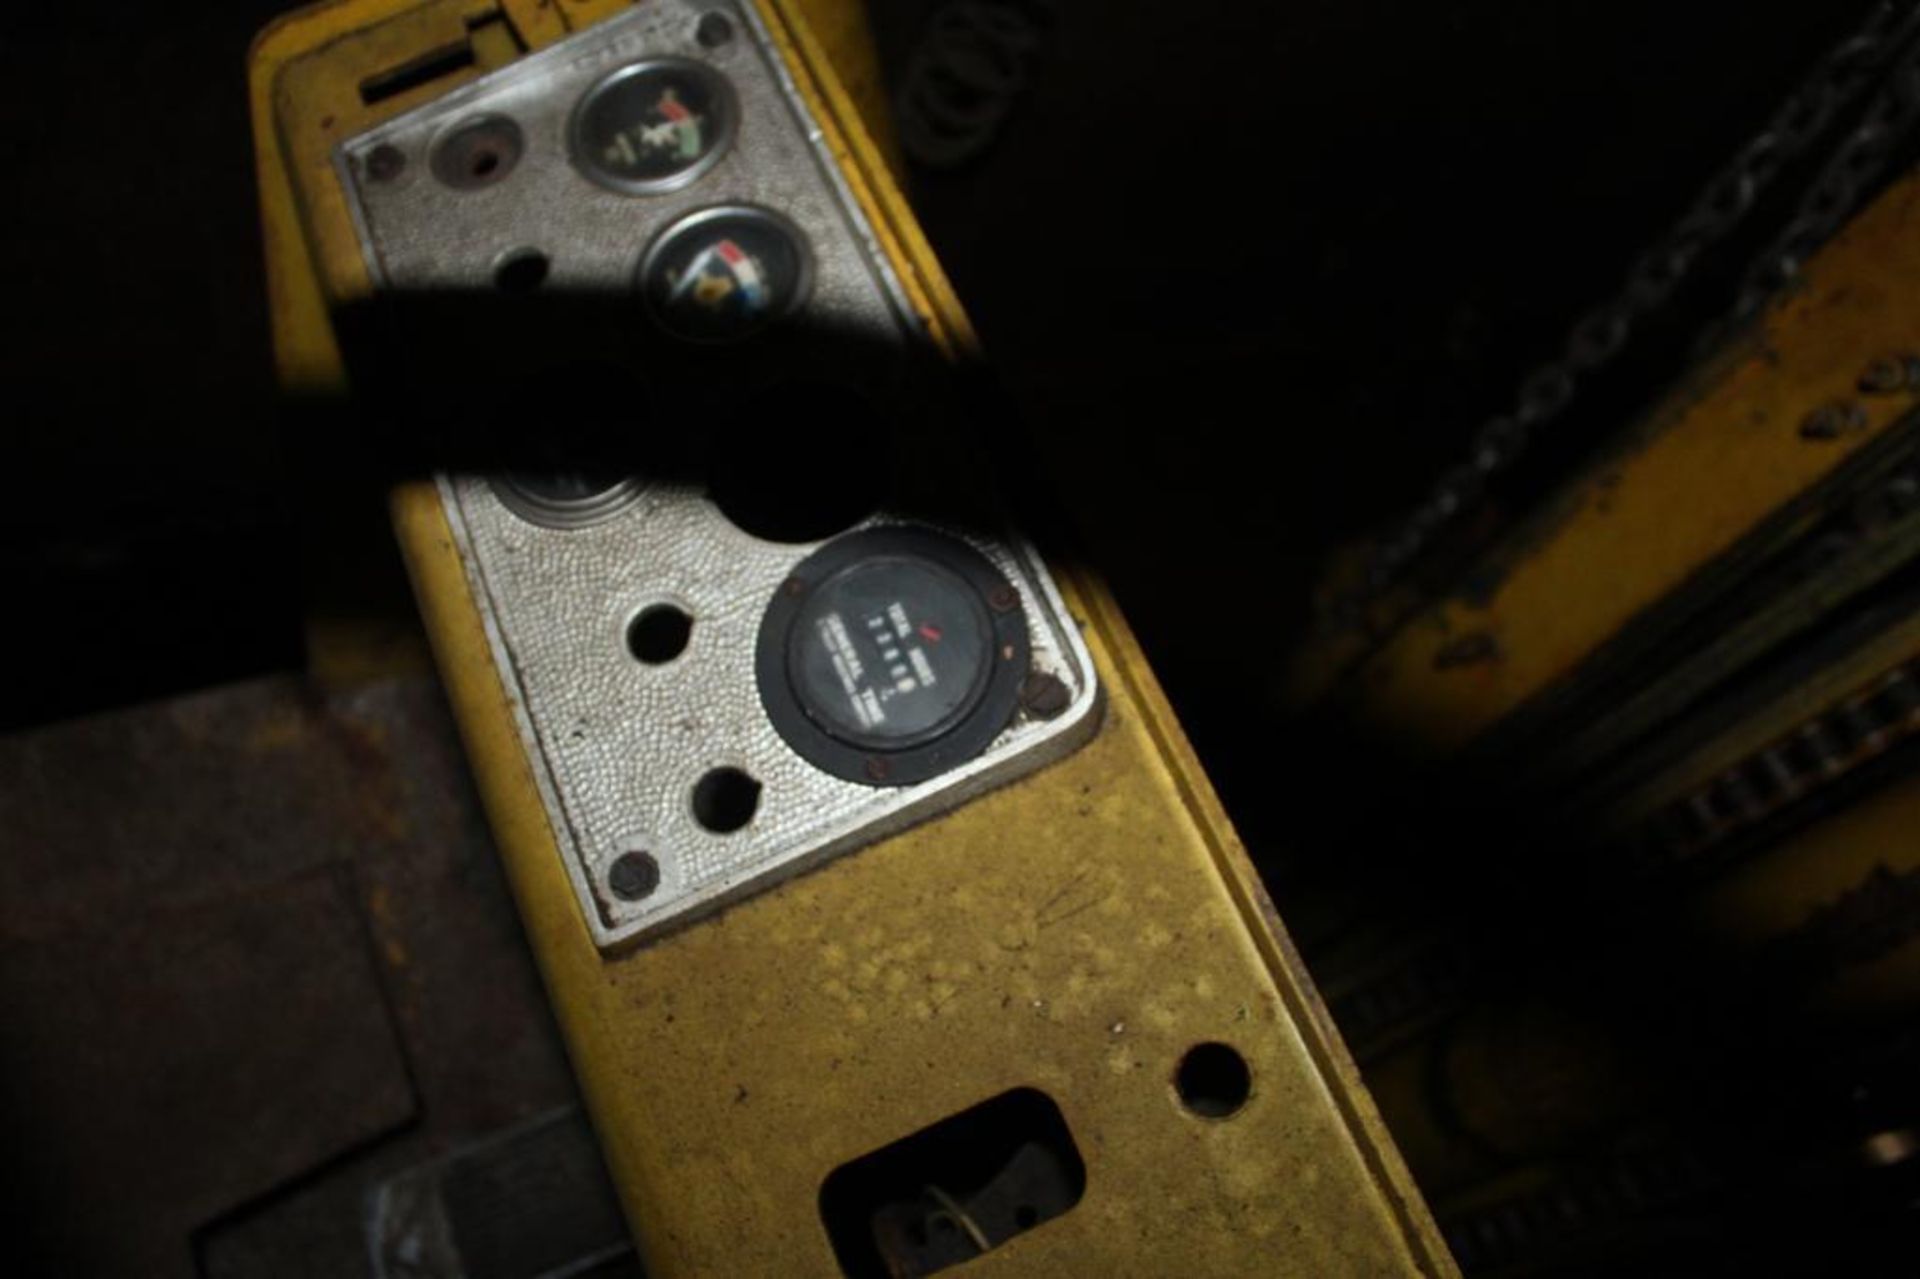 Caterpillar Tow Motor Forklift - Runs but has hydraulic issues and overheats - Image 8 of 16